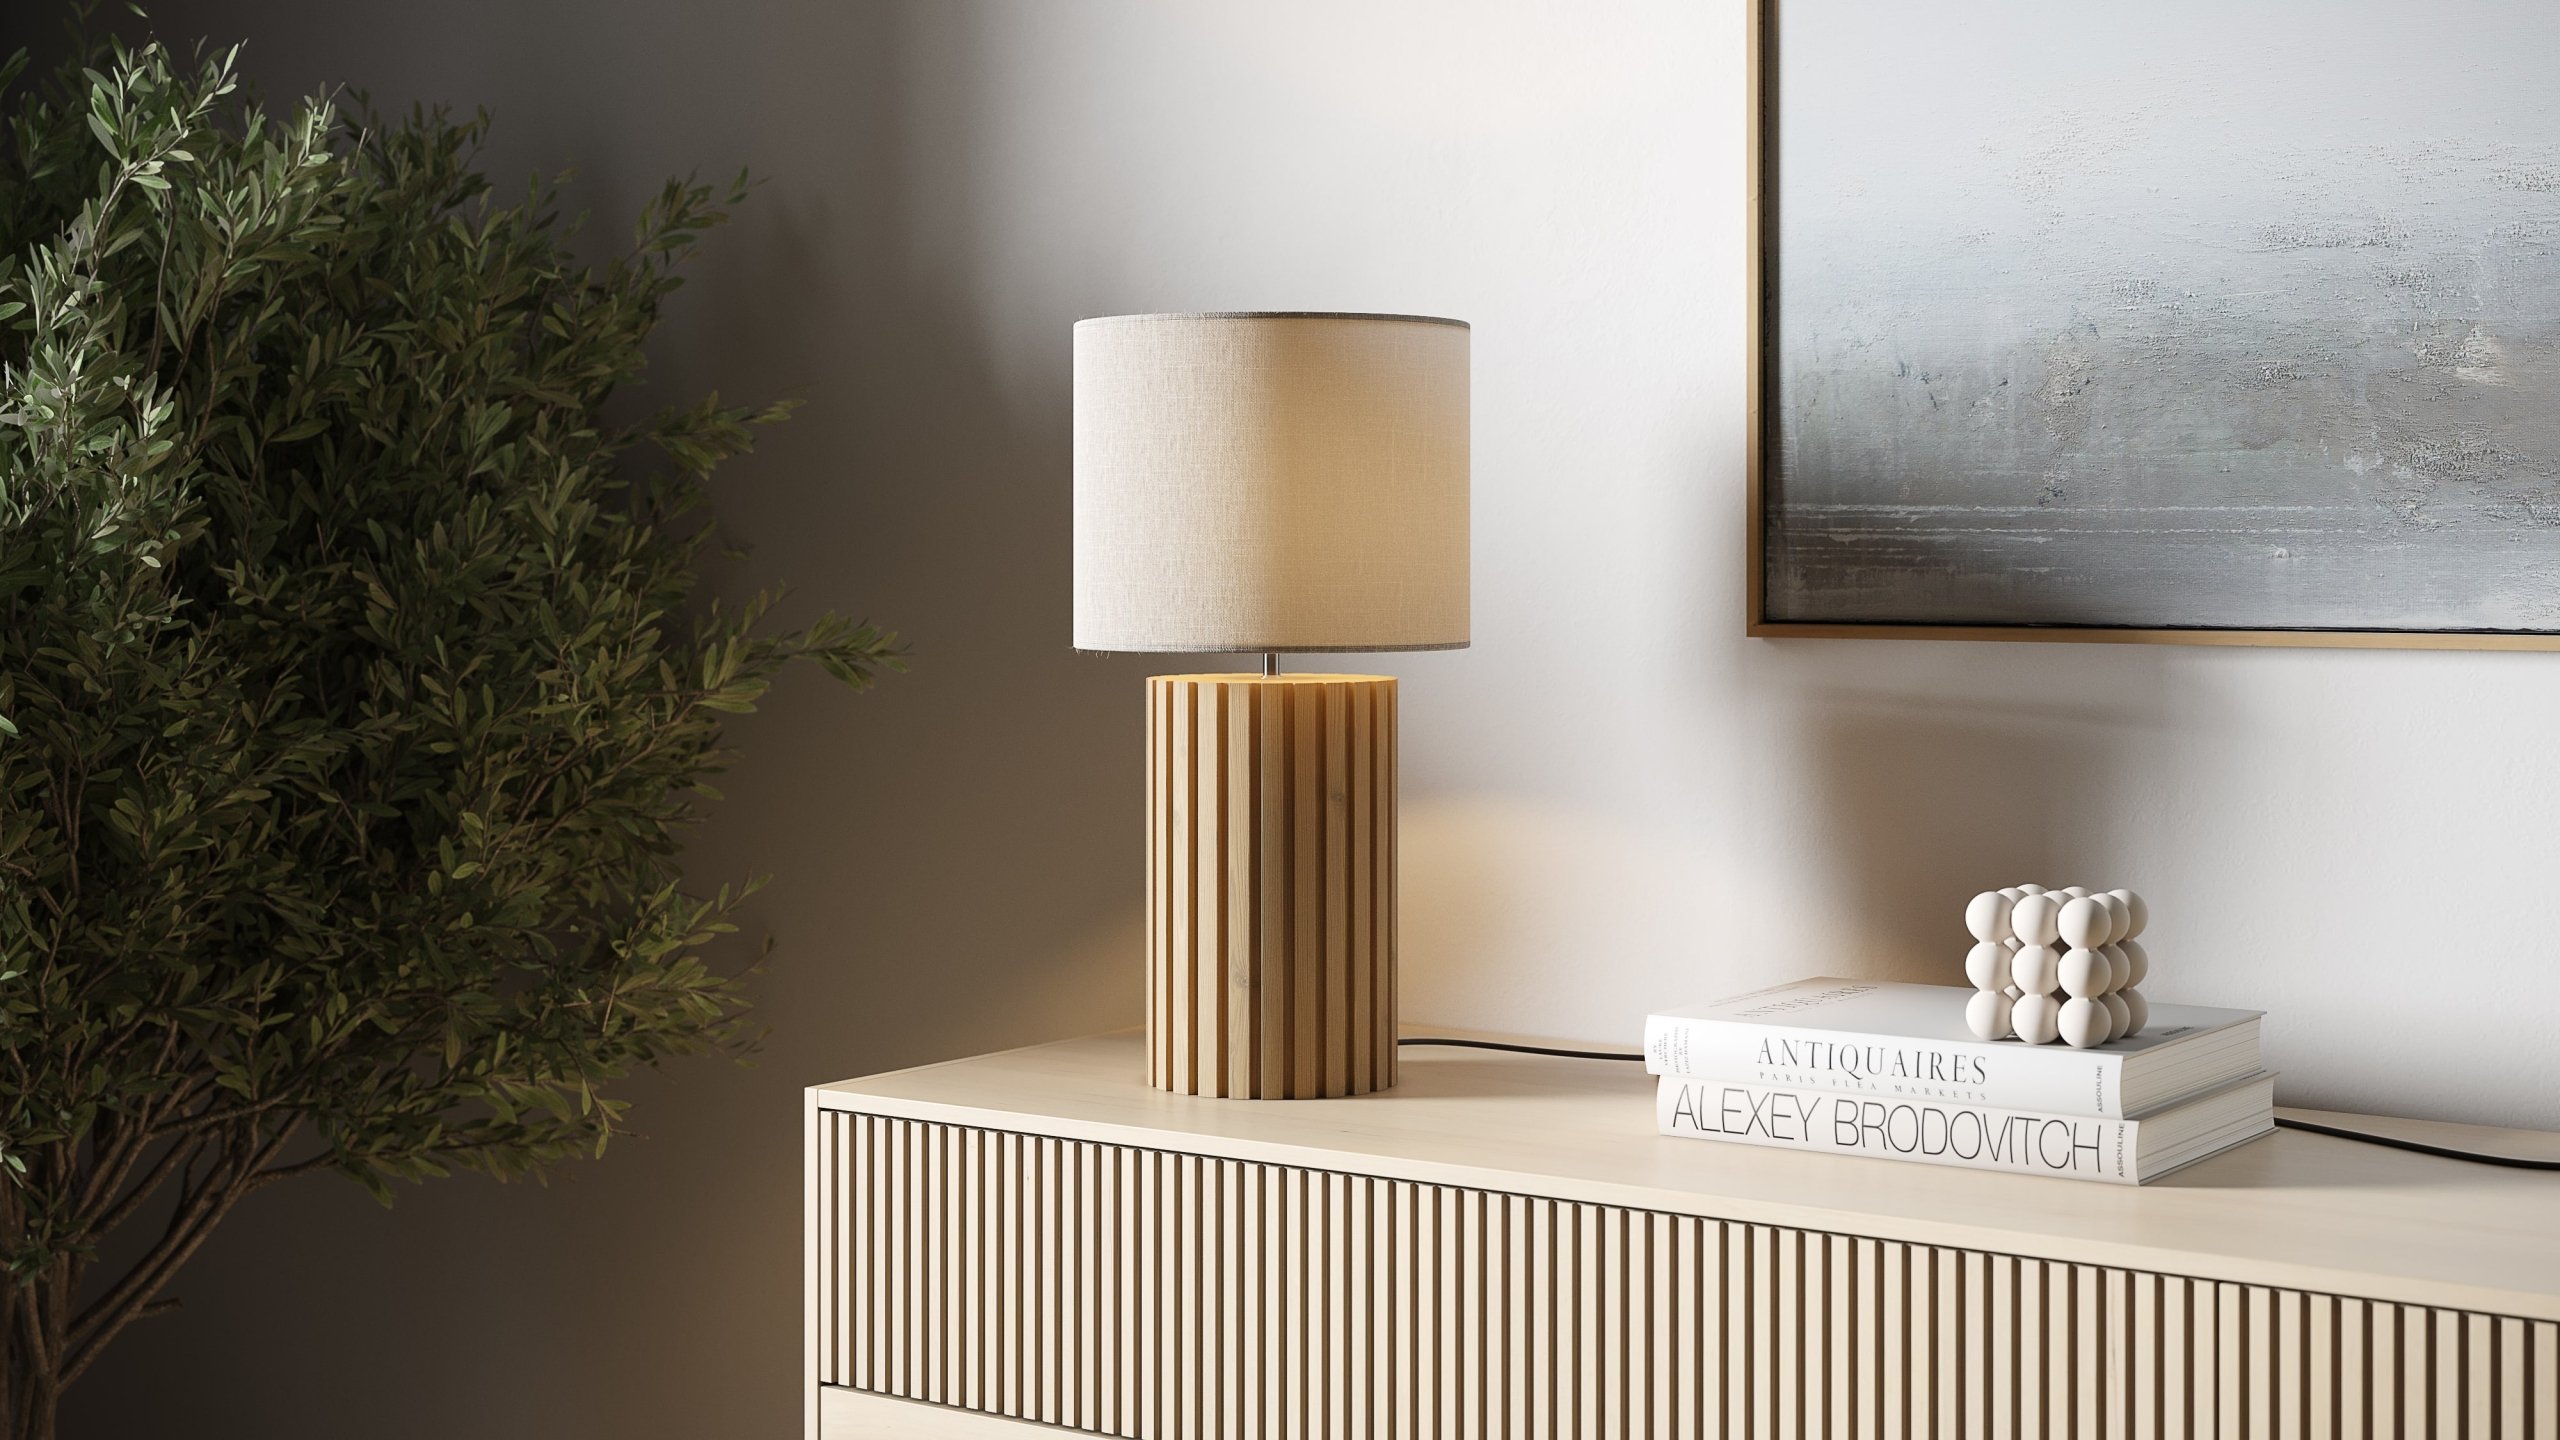 Lamp Rendered in a Lifestyle Setting